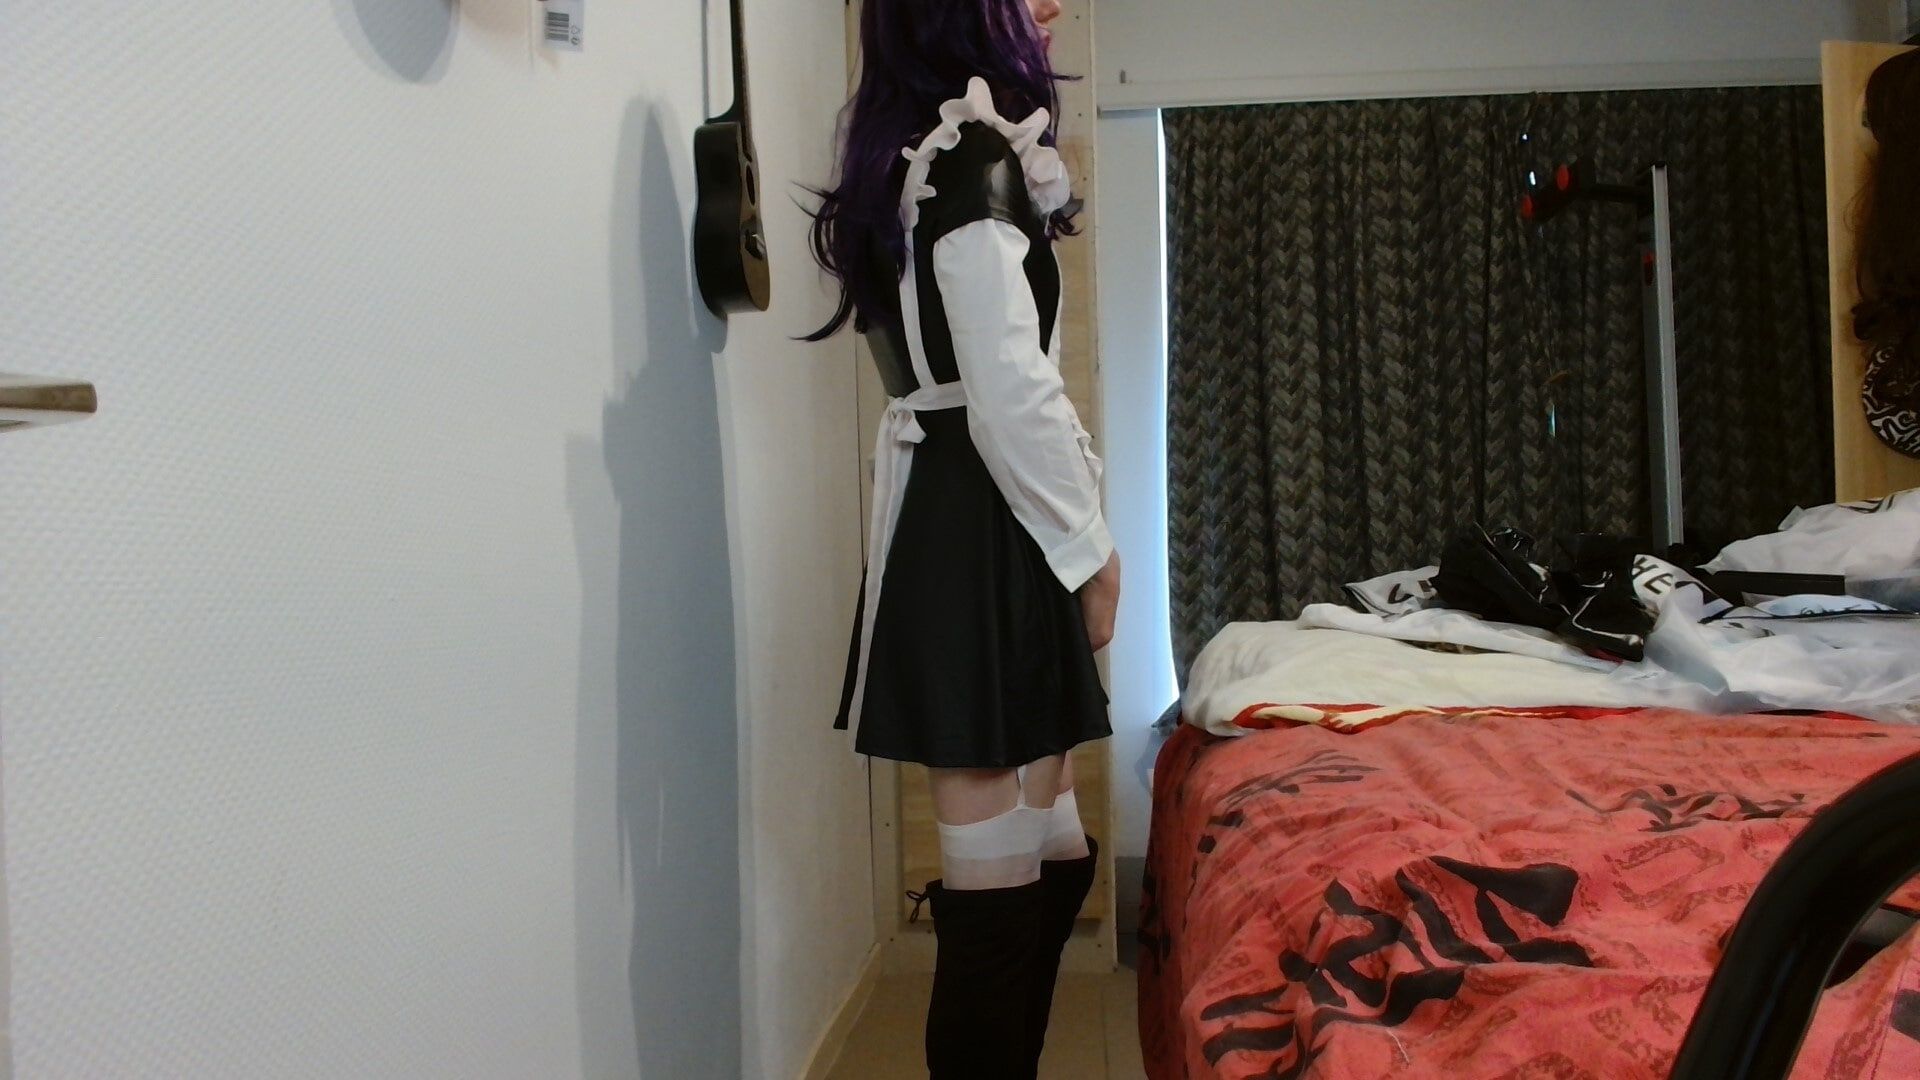 maid outfit #2